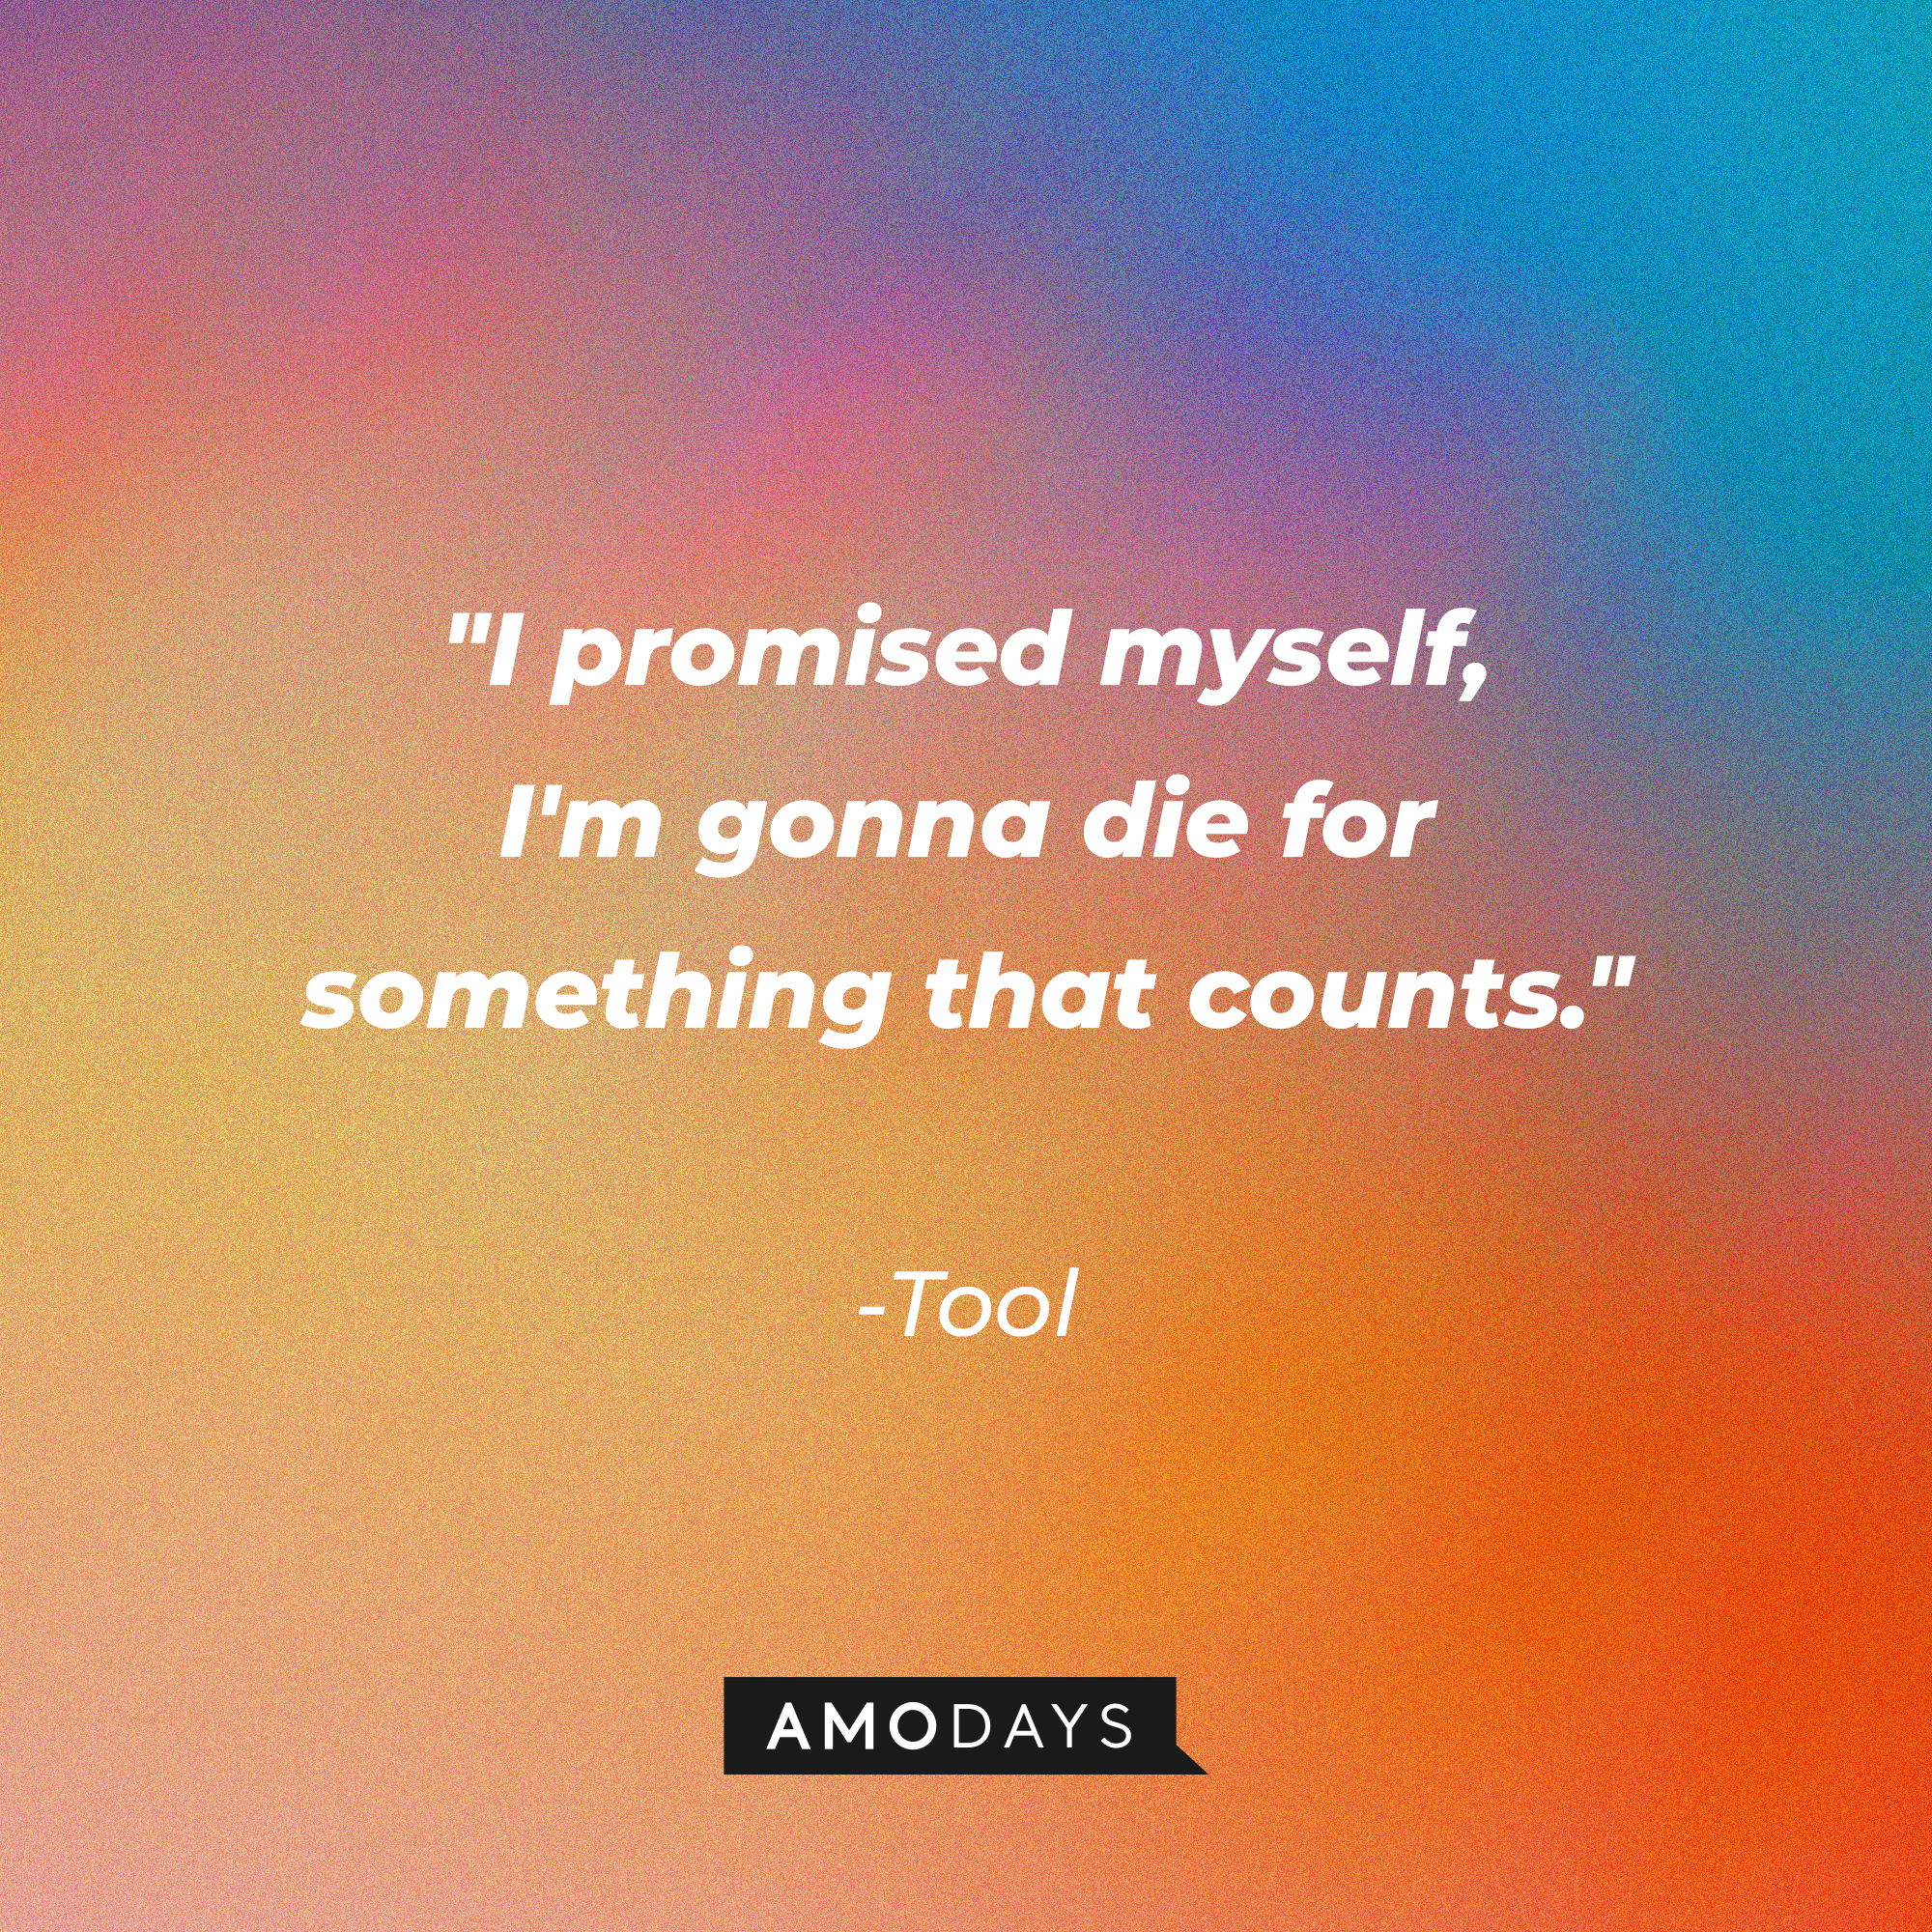 Tool’s quote: "I promised myself, I'm gonna die for something that counts." | Source: AmoDays